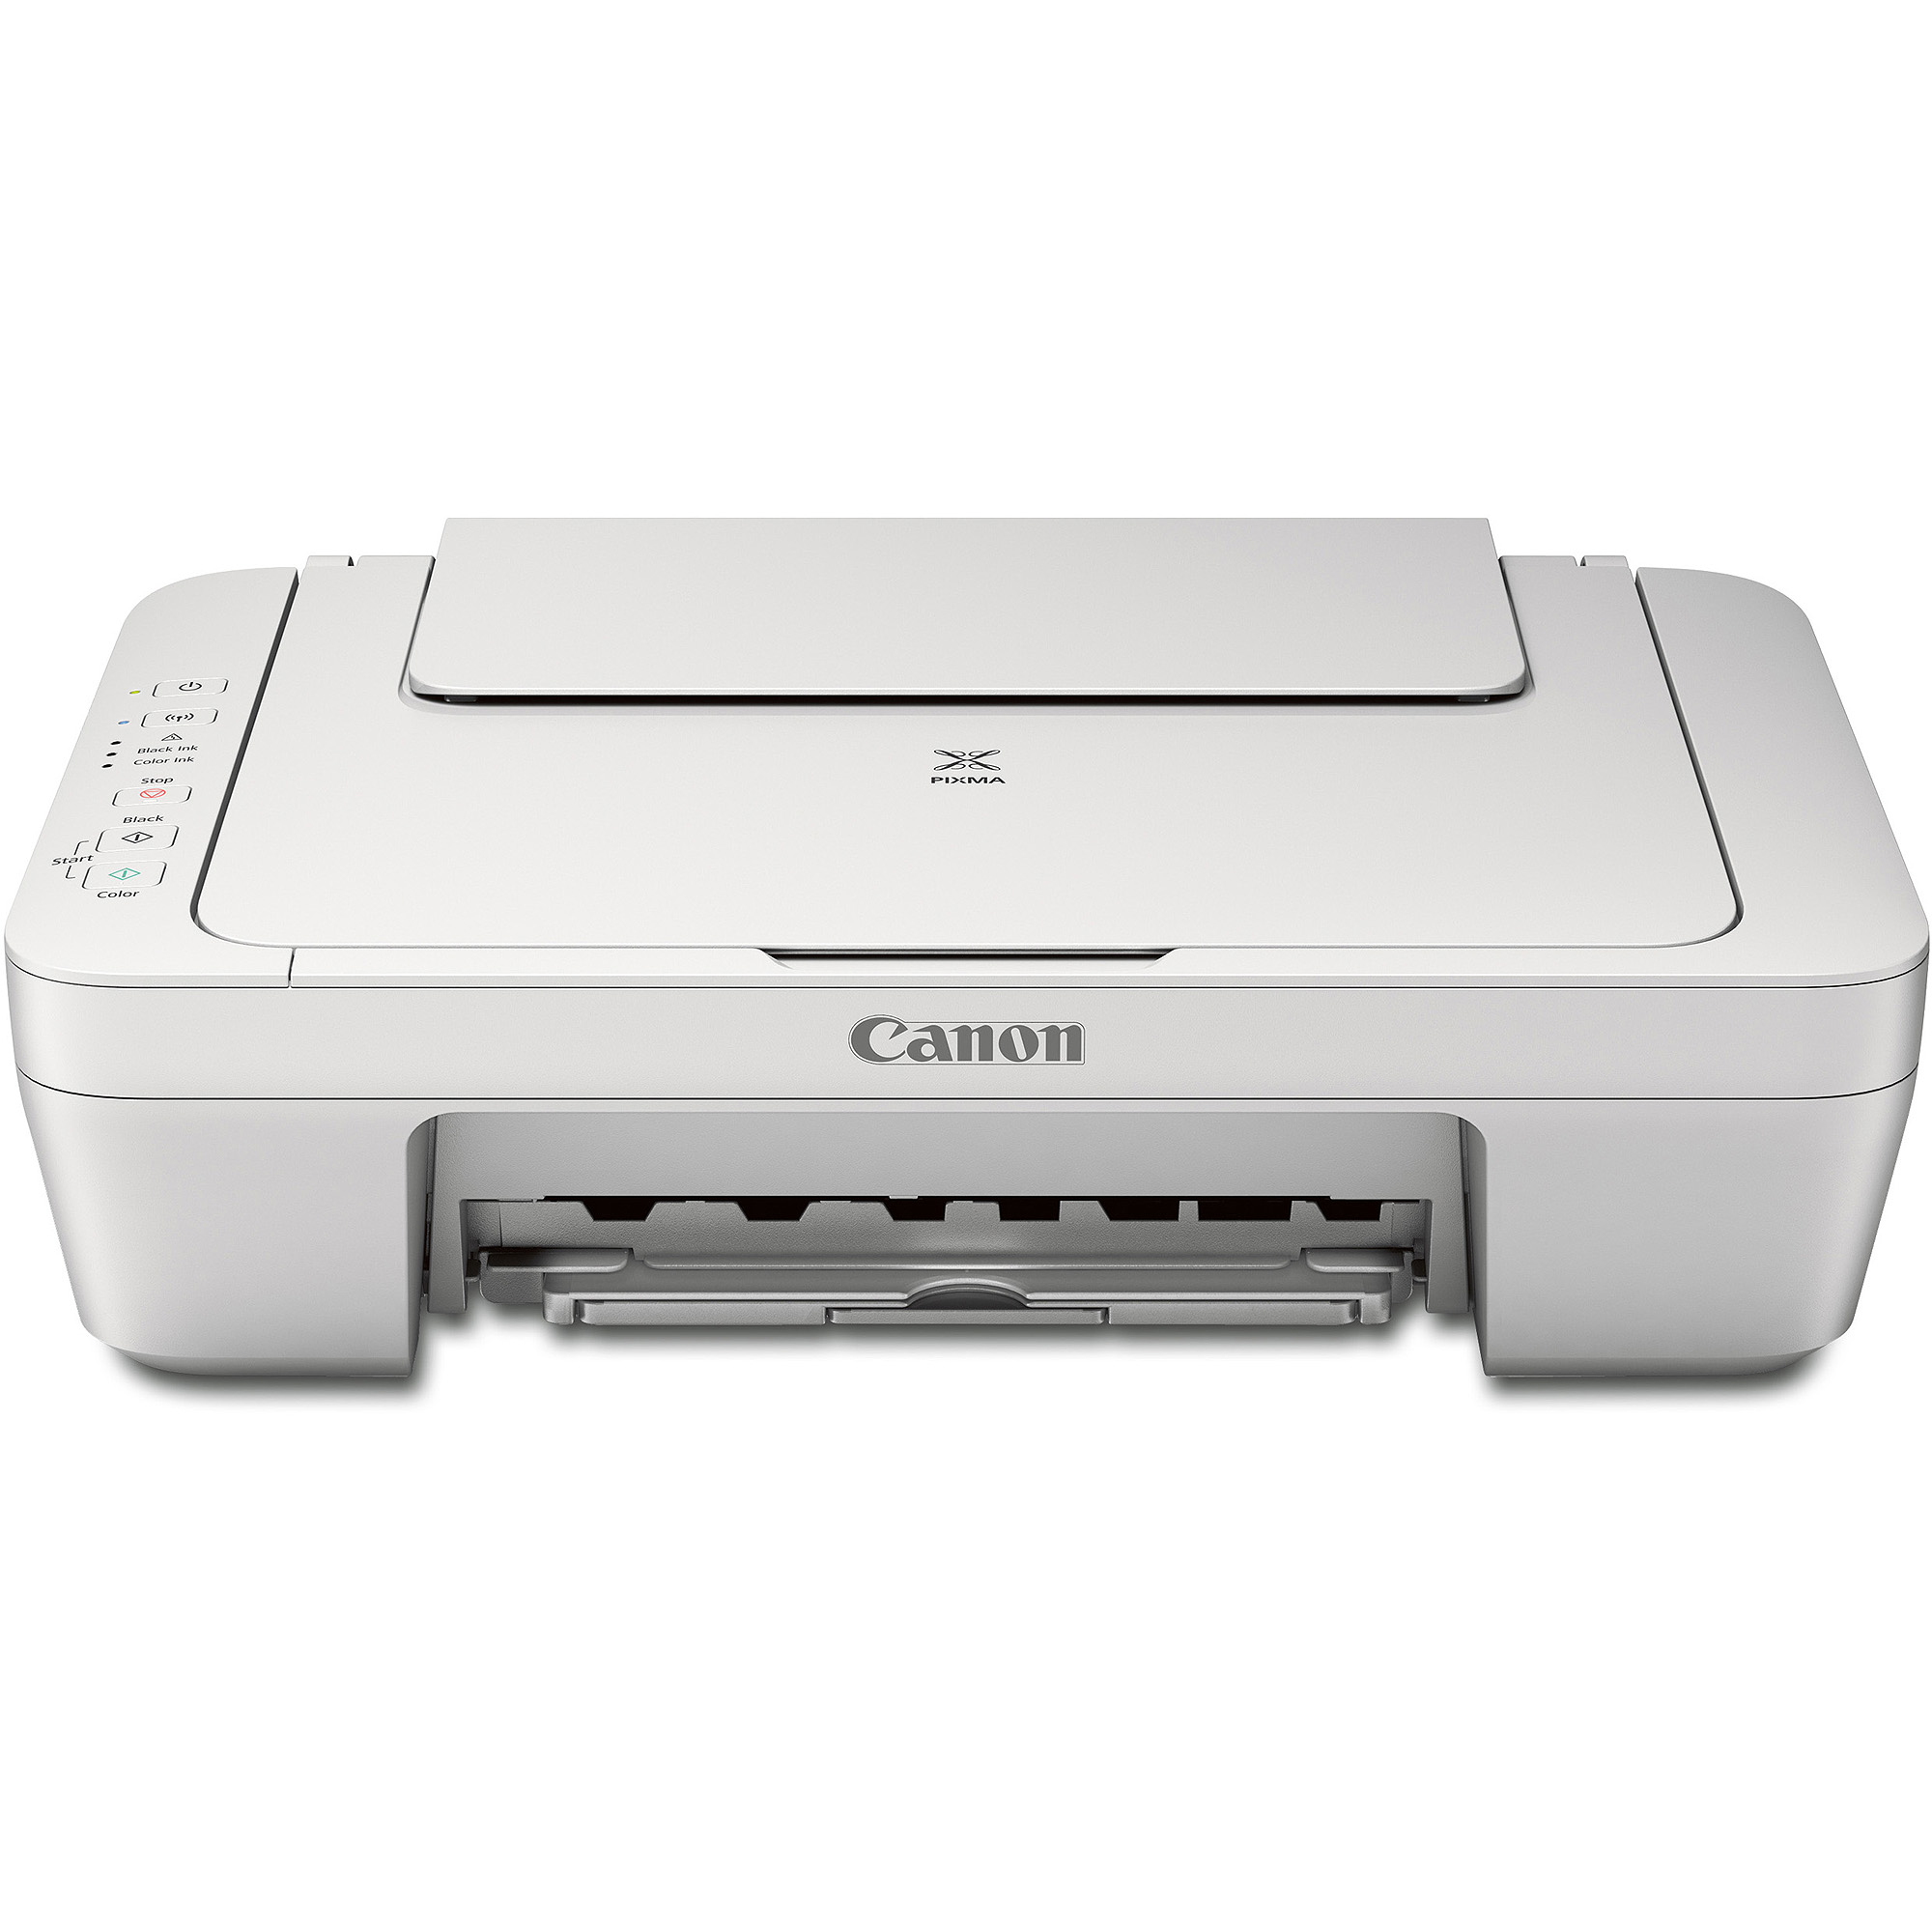 Canon PIXMA MG2920 Wireless Inkjet All-in-One Multifunction Printer - image 3 of 3